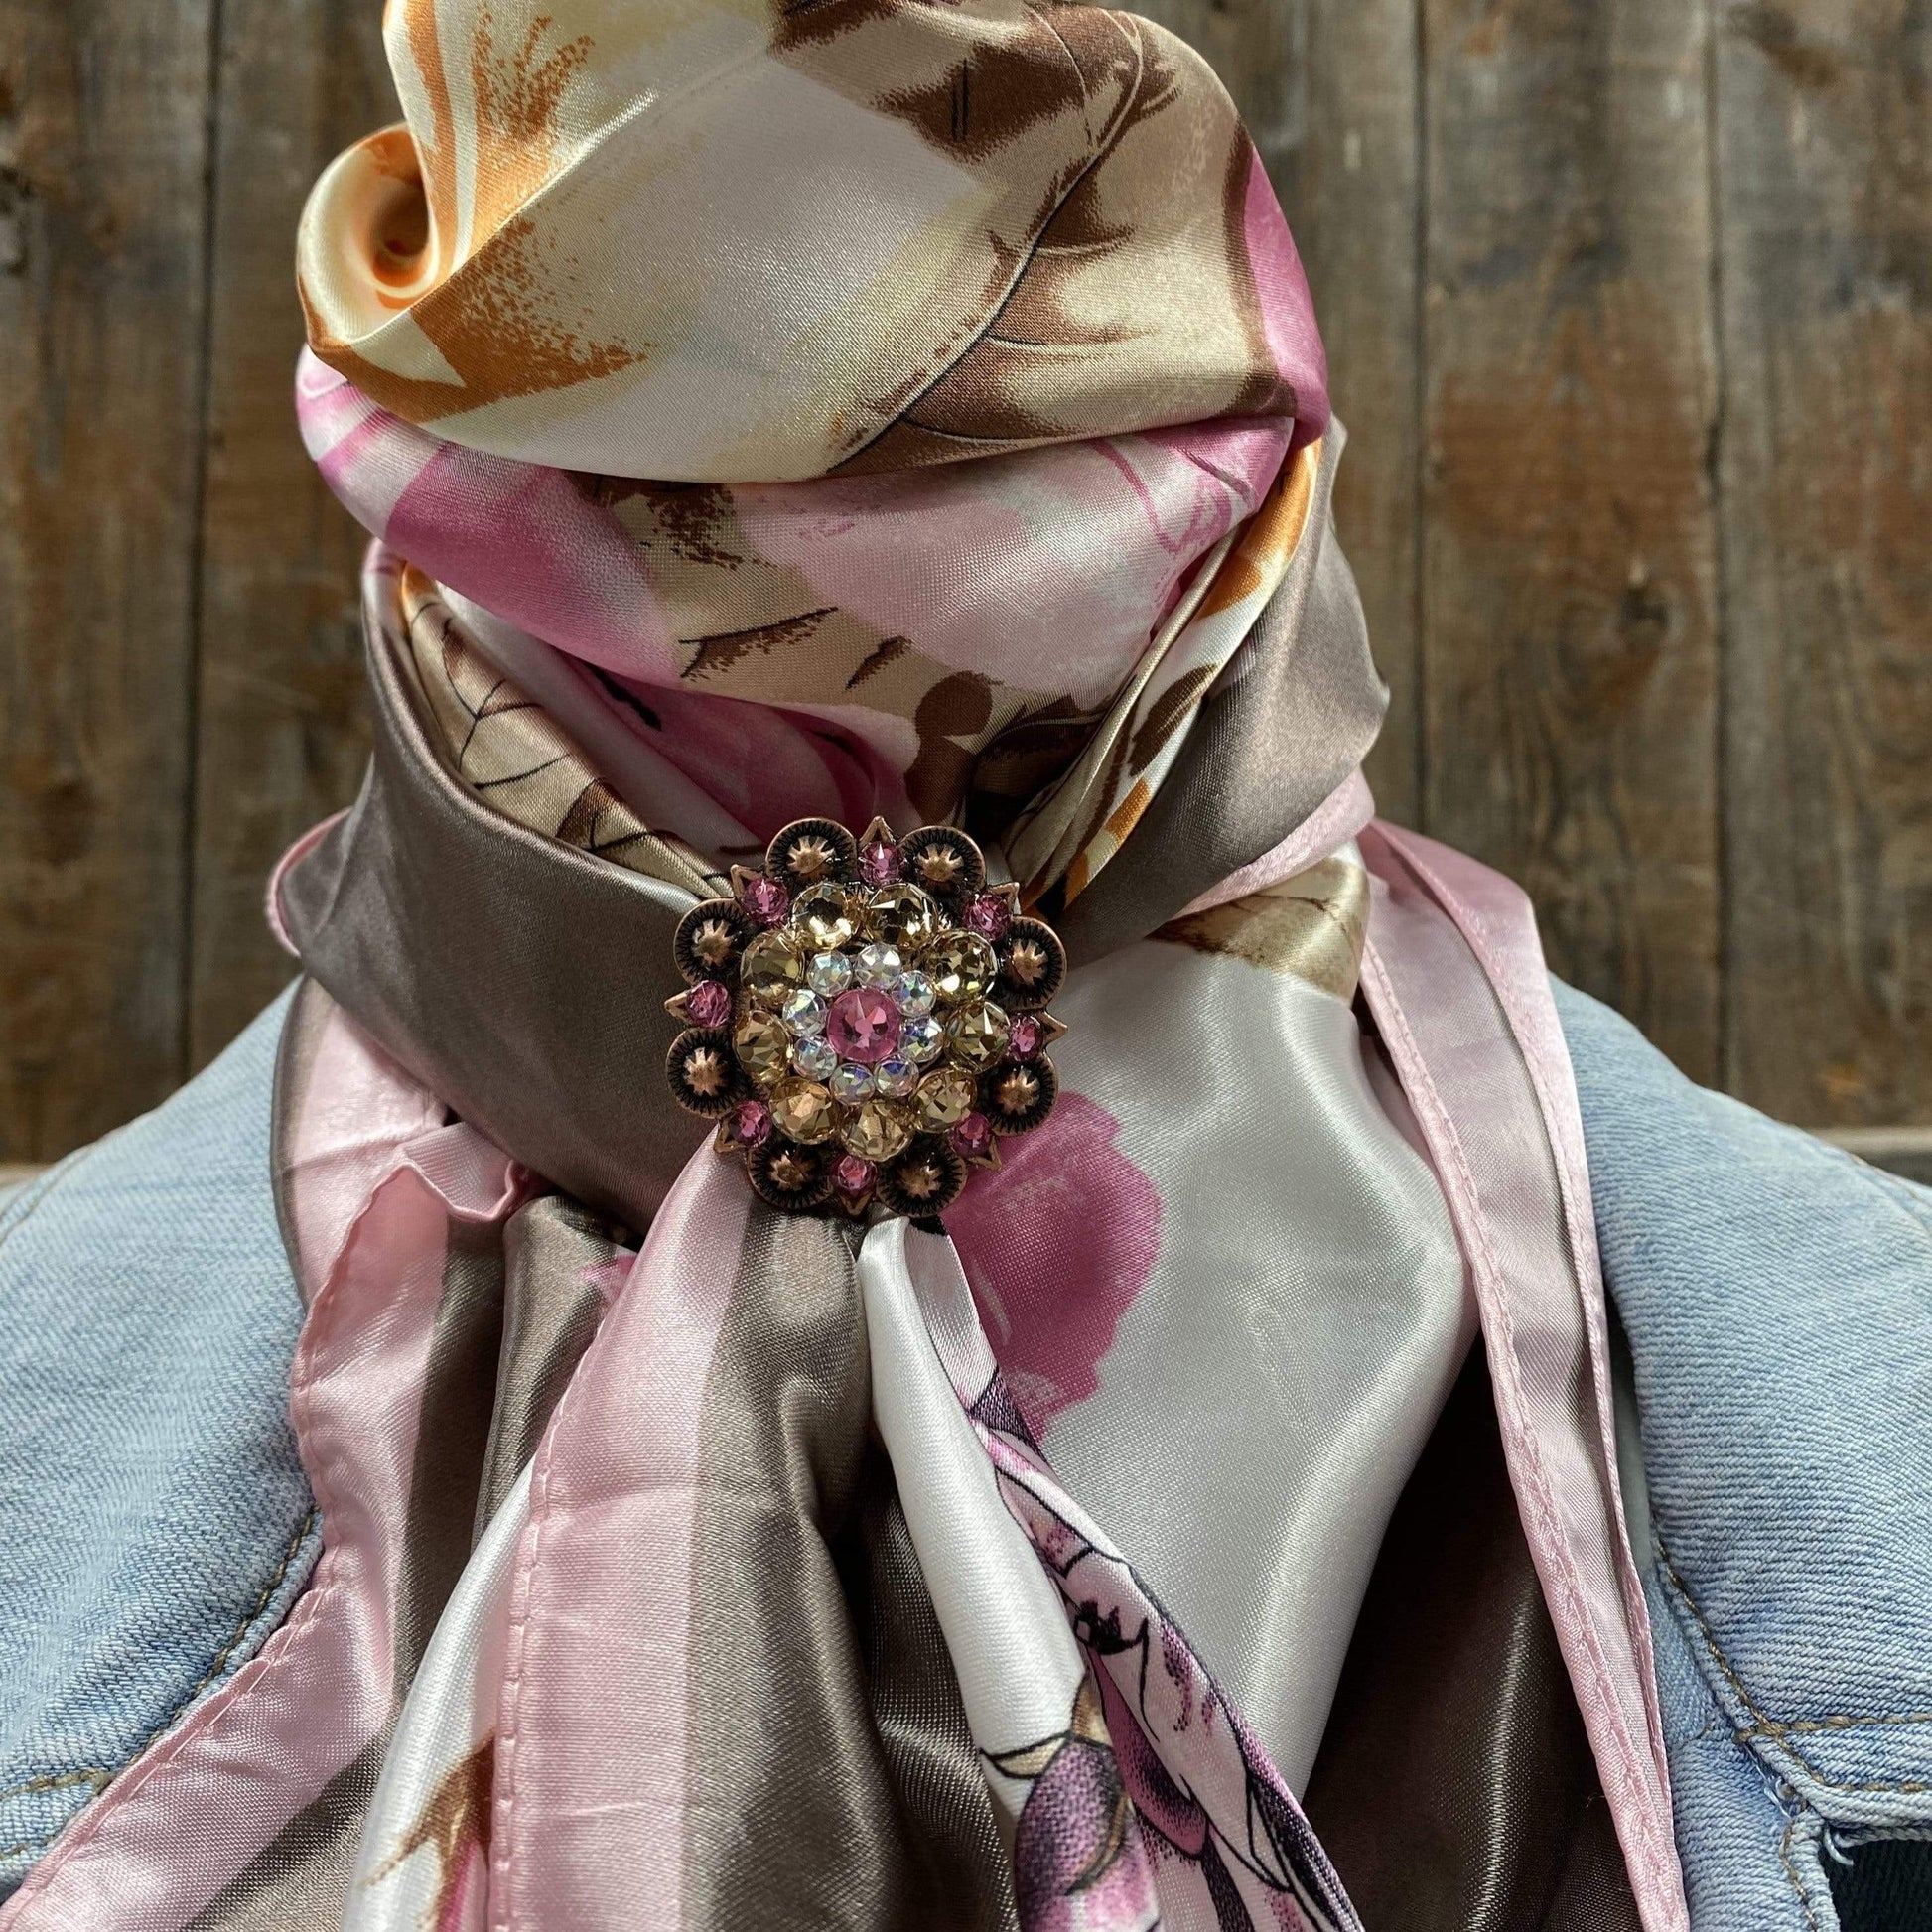 Wild Rags WRC40A Pretty In Pink Roses Wild Rag/Scarf - Copper Pink, AB, & Champagne Slide WRC40A